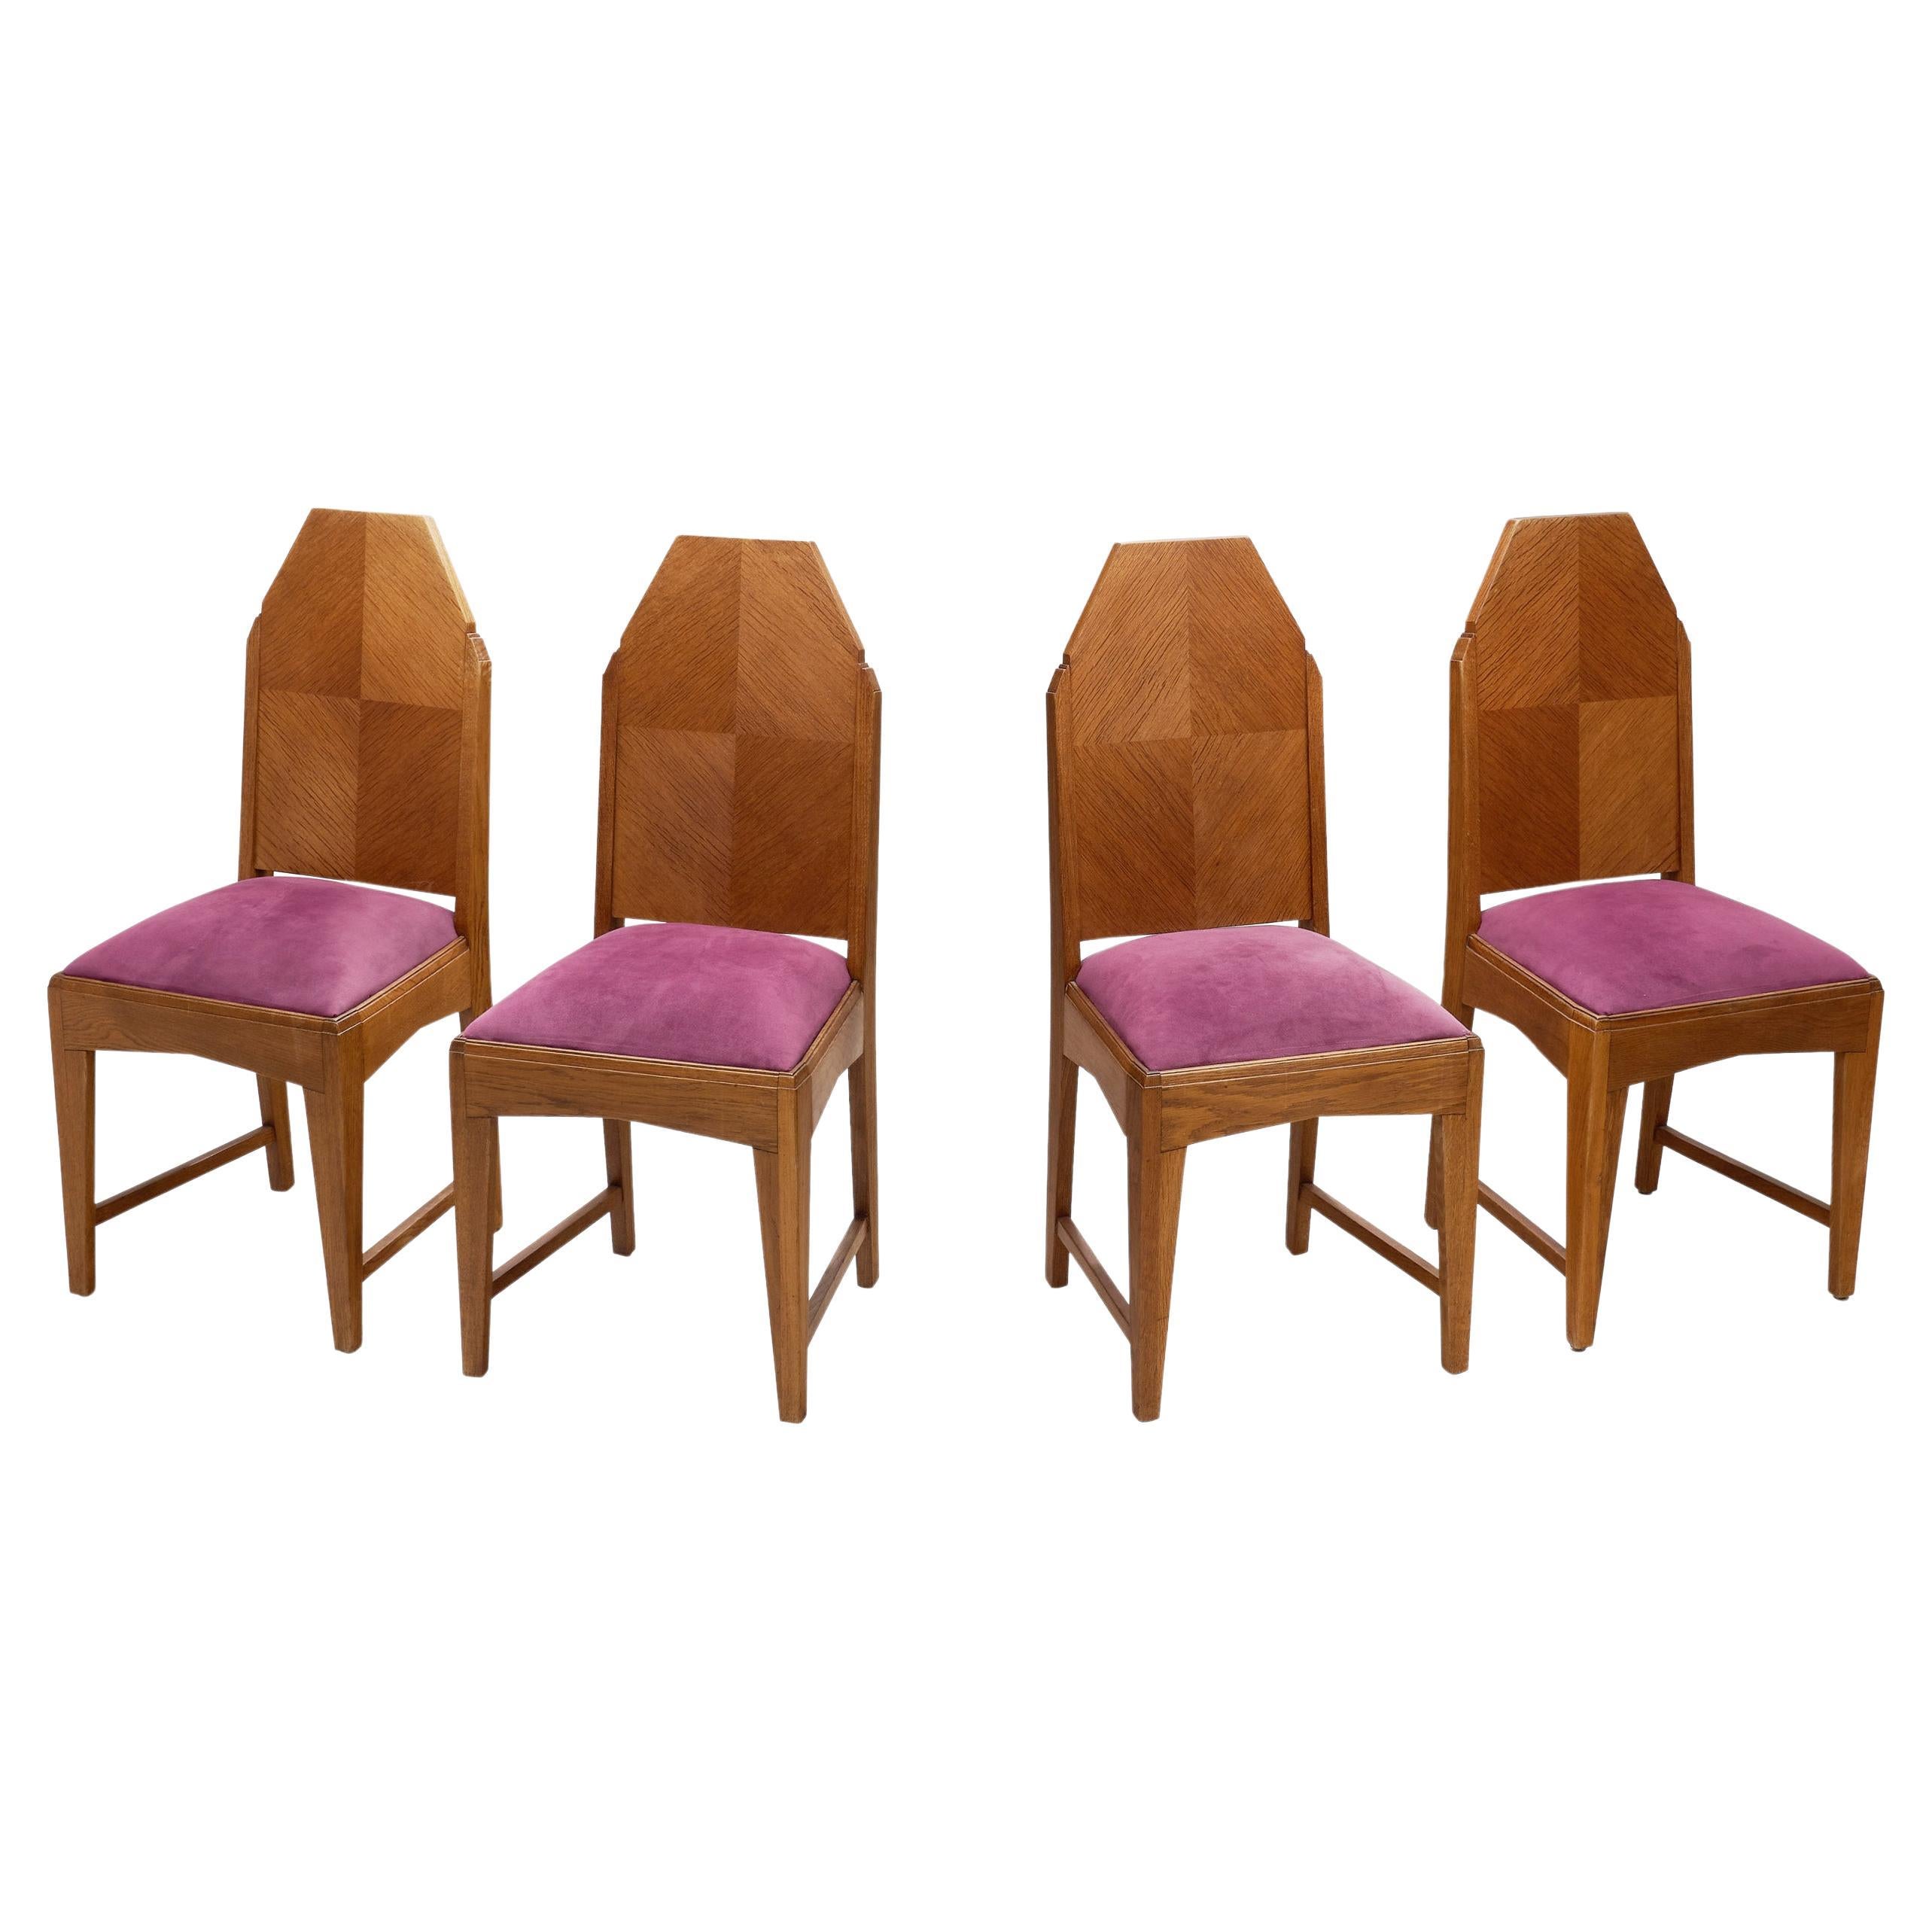 Set of Four Amsterdamse School Oak Dining Chairs, The Netherlands 1920s For Sale